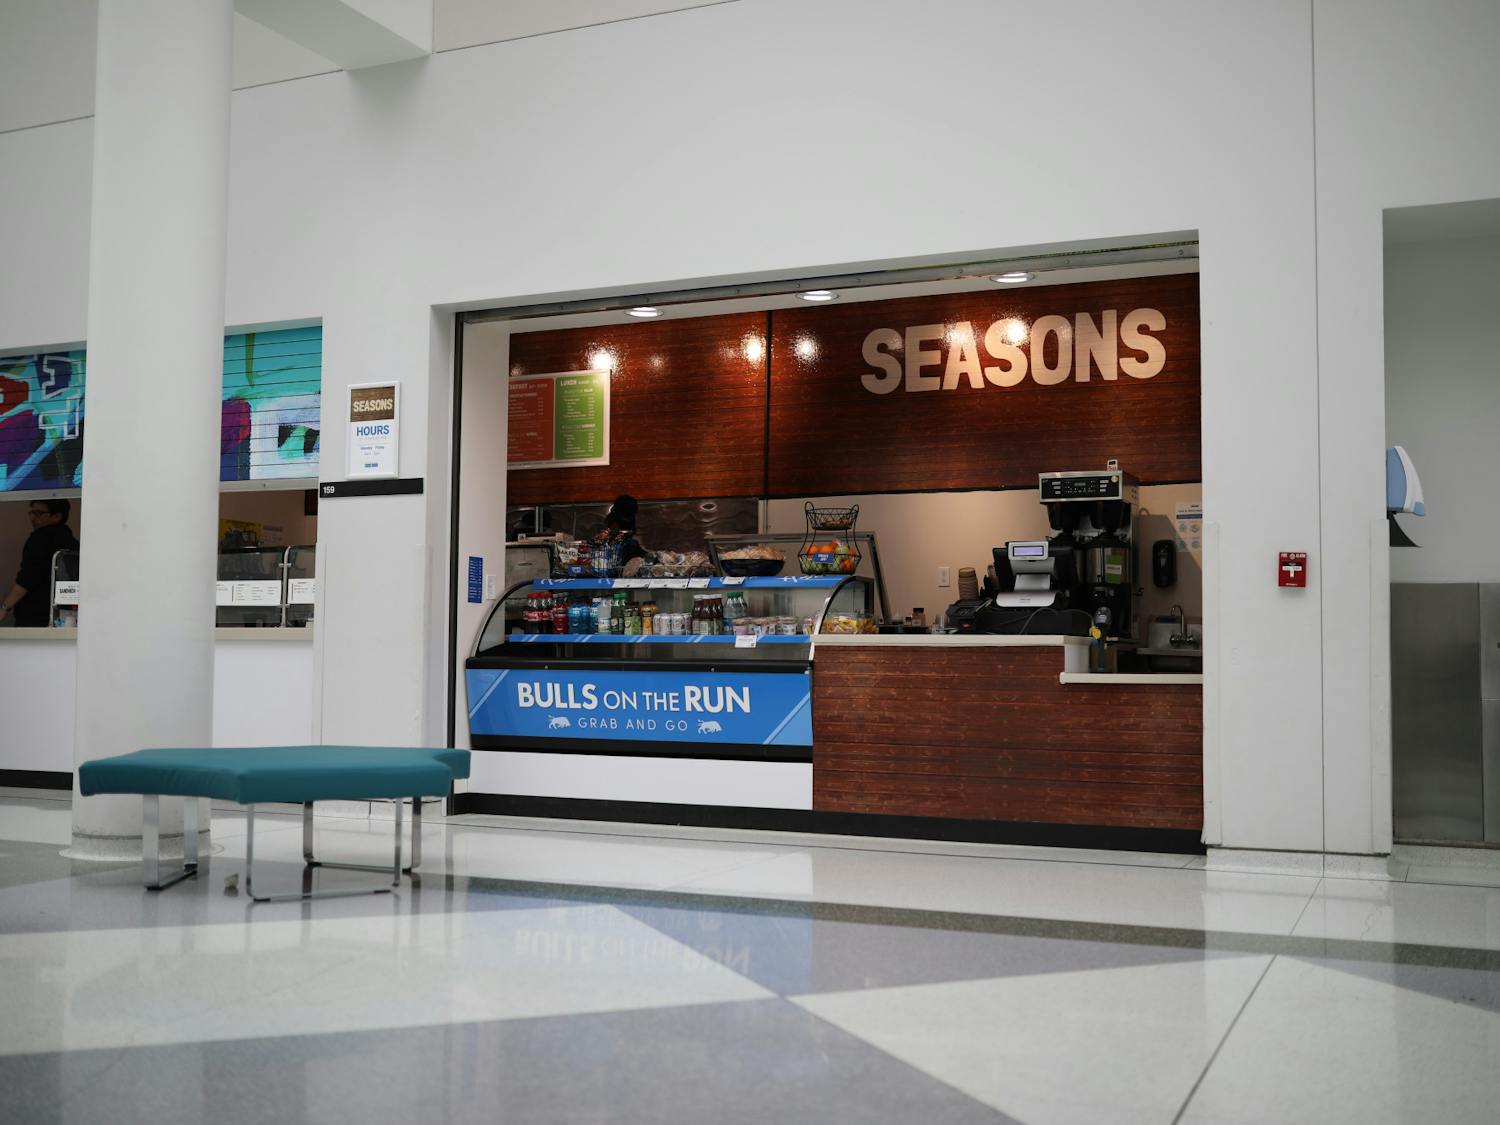 Seasons cafe in the CFA has recently reopened after closing down during the COVID-19 pandemic in 2020.